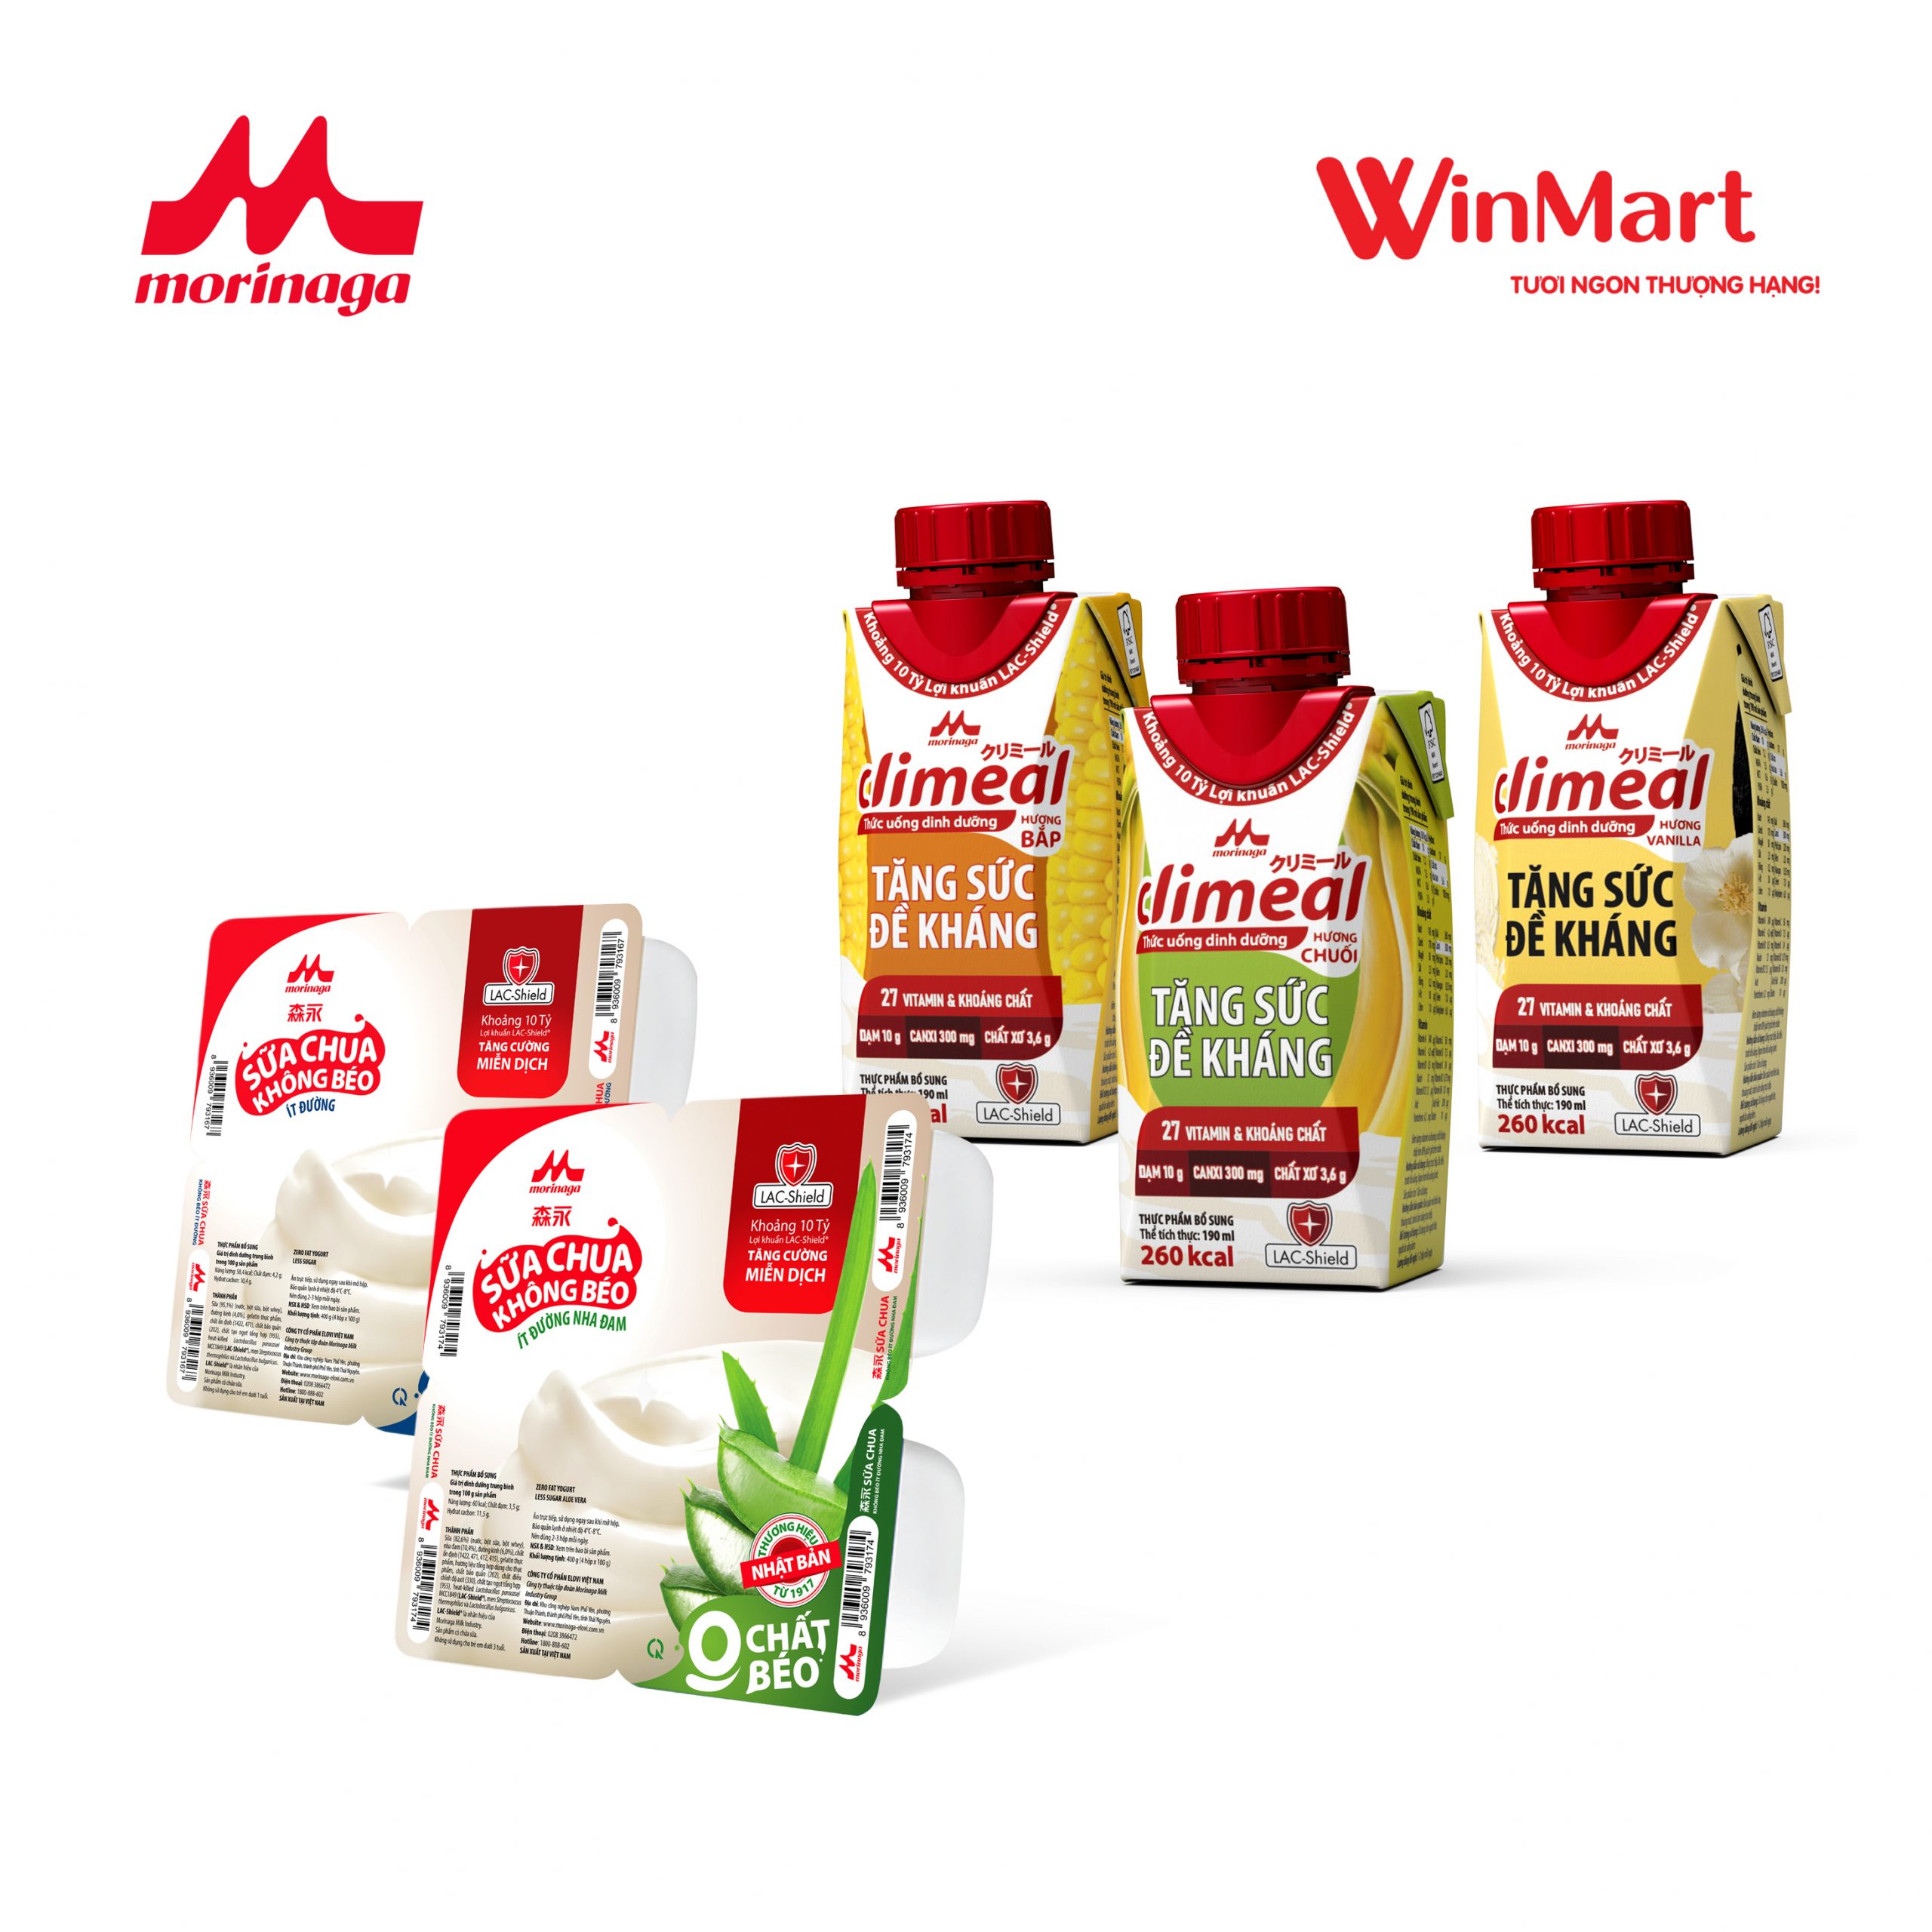 Morinaga Milk Industry Group (ELOVI Vietnam) Introduces Two New Products in Collaboration with WinCommerce